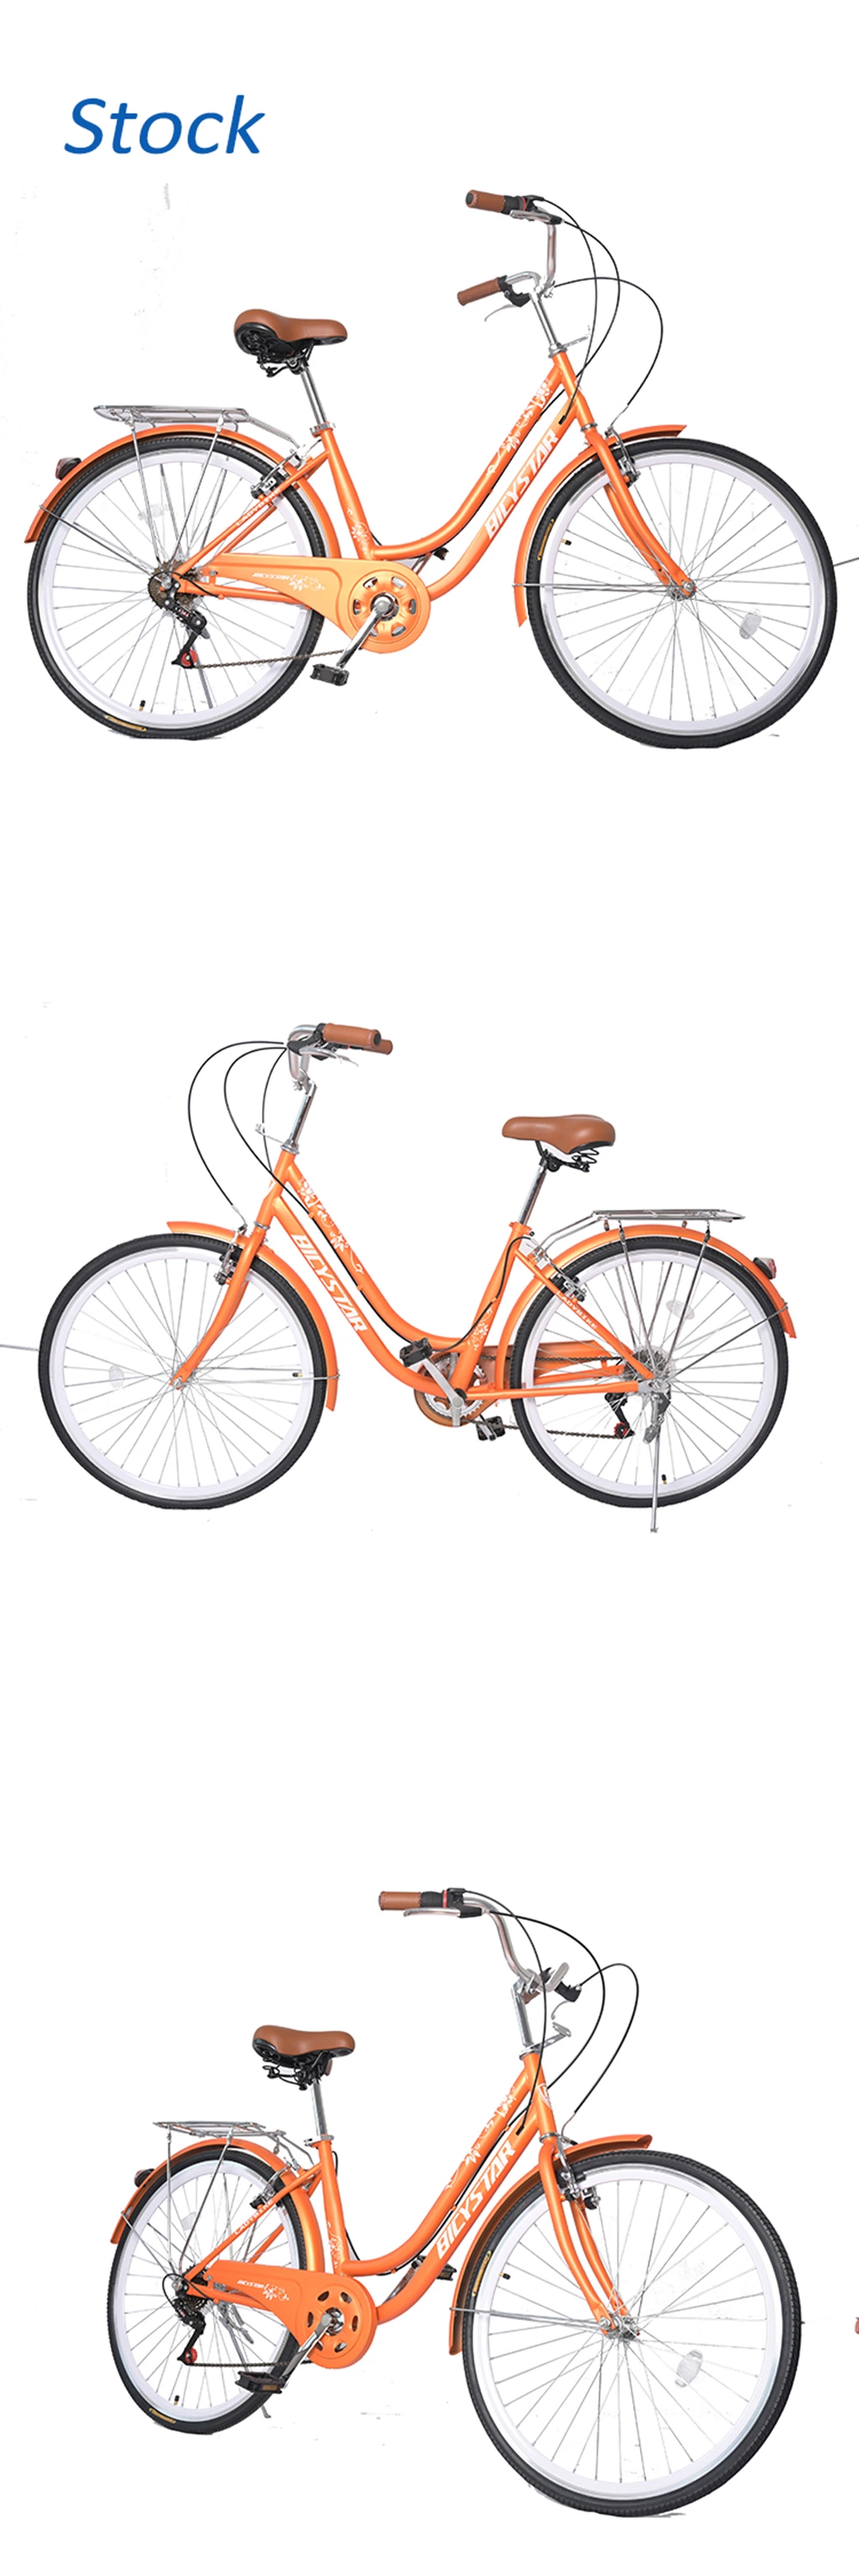 Classic Women Adult Urban Bike Bicycle for Adult Woman